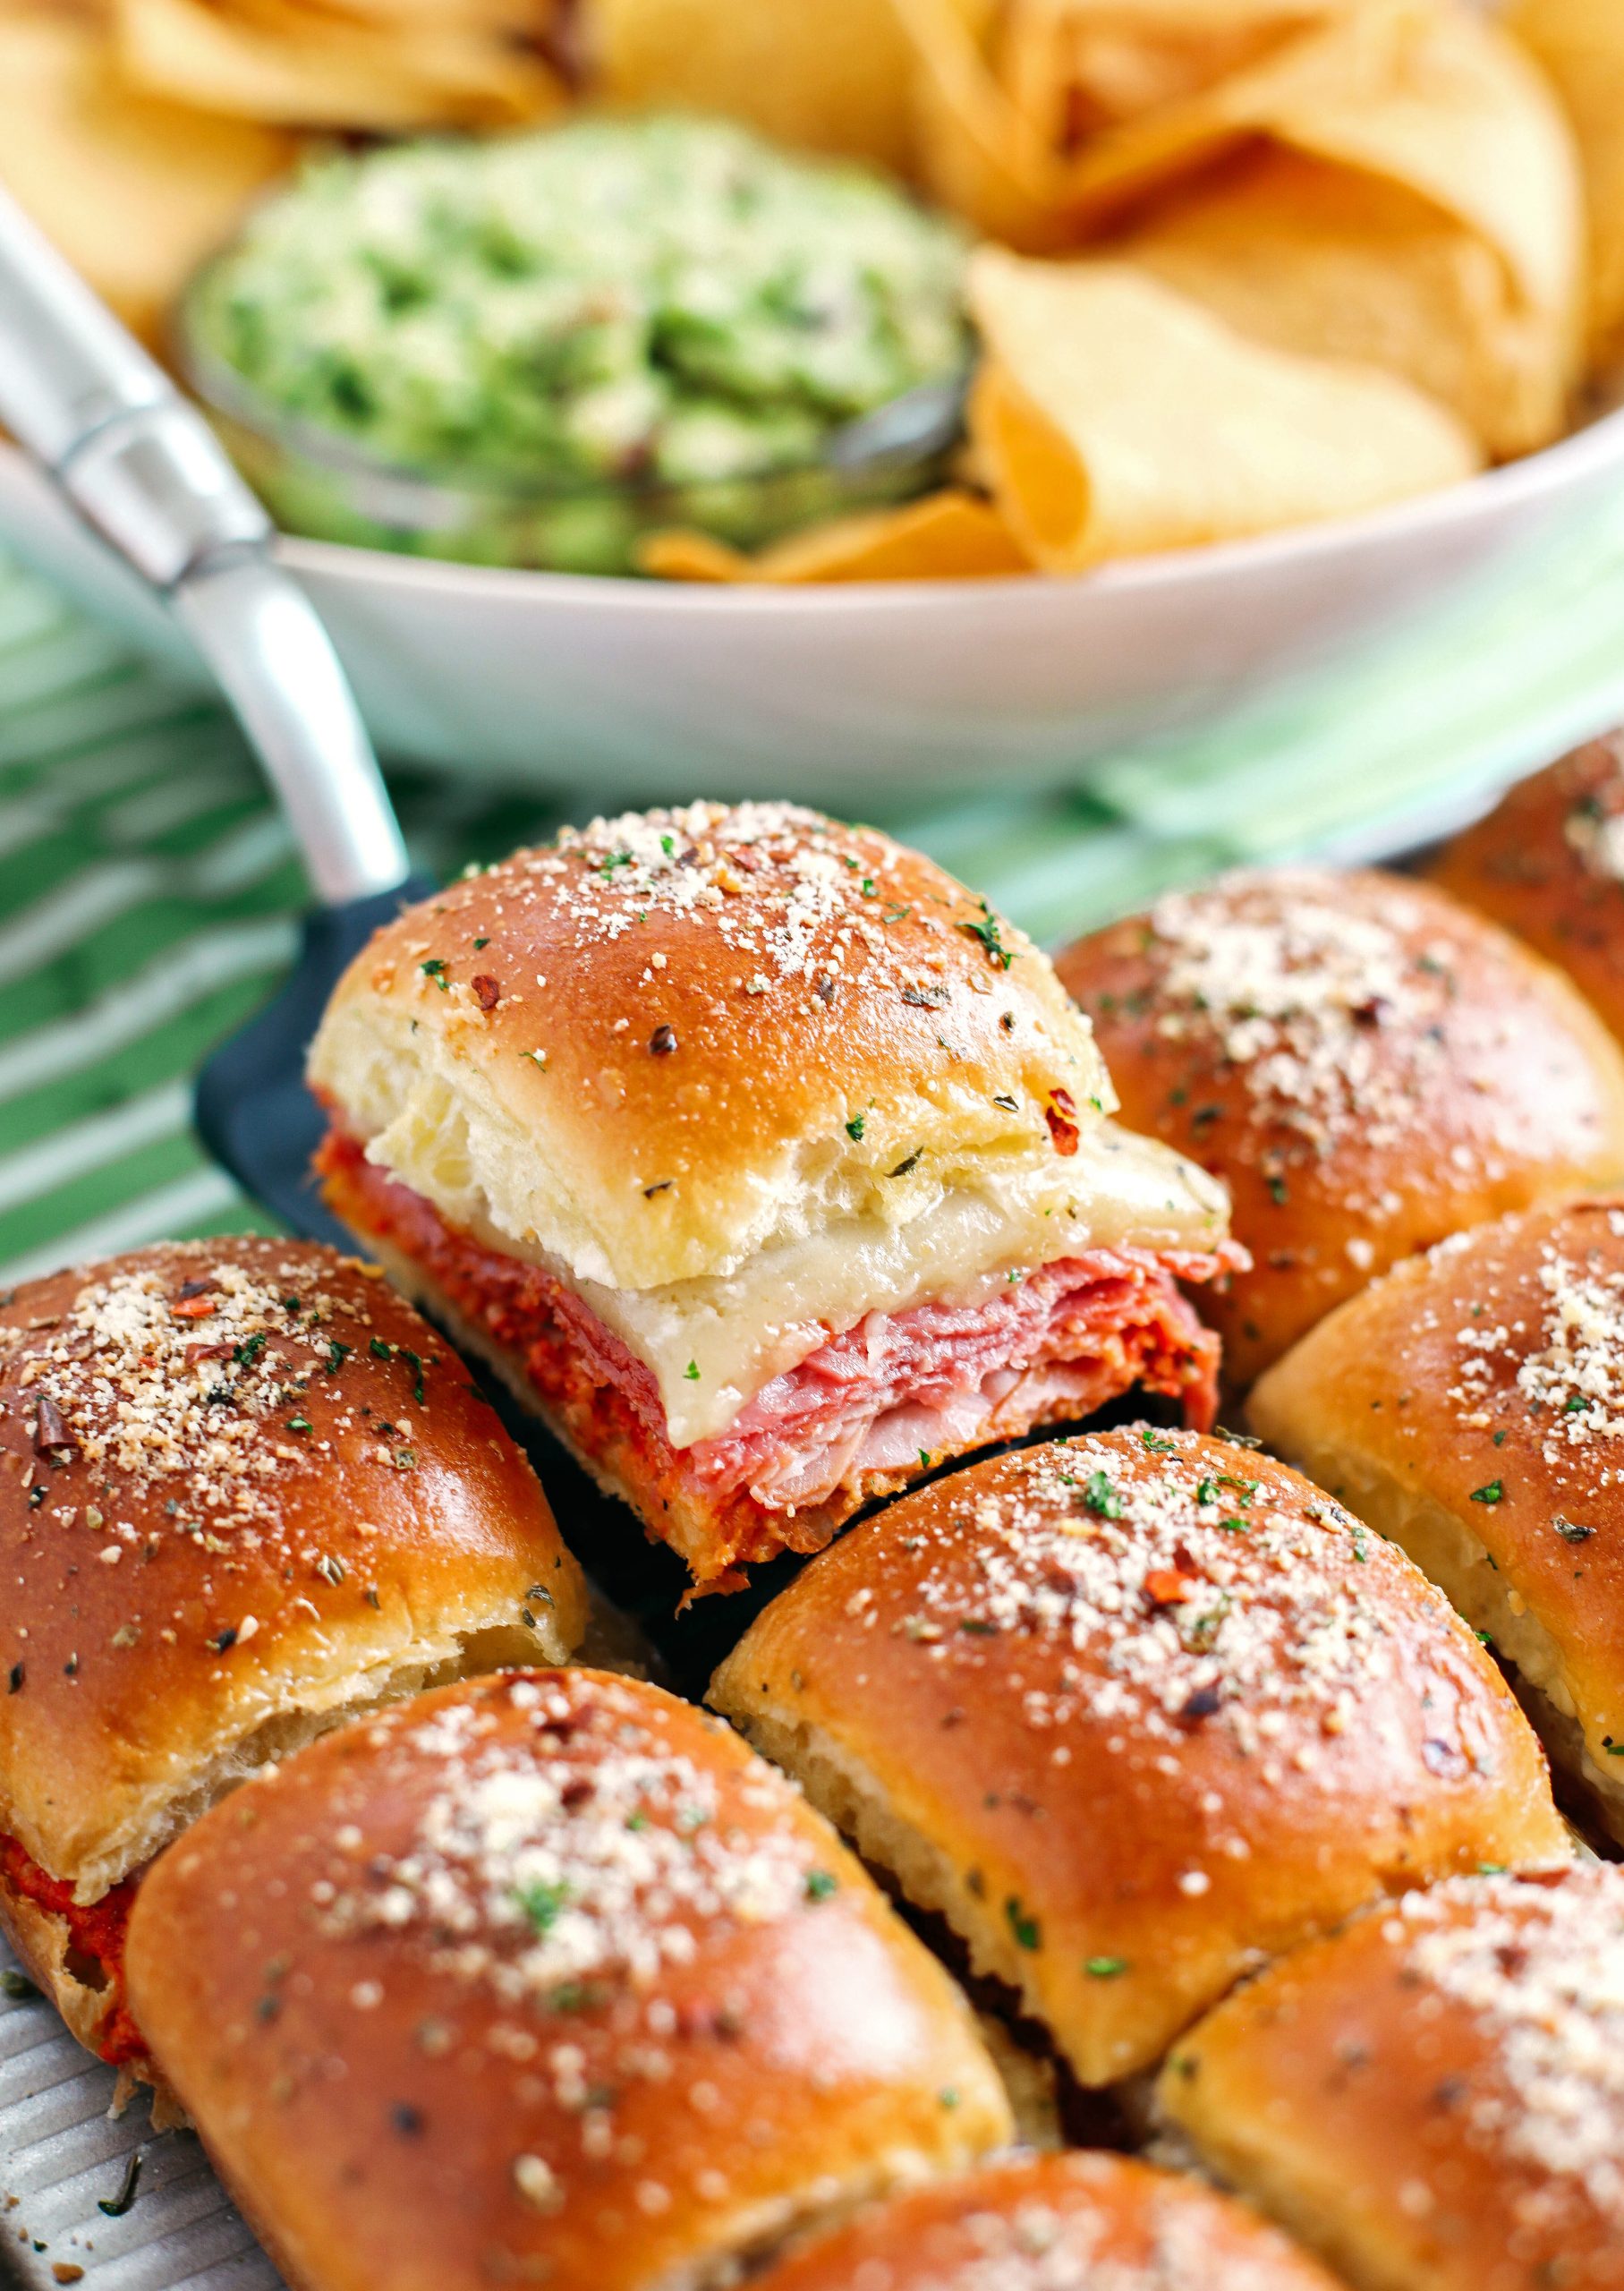 Delicious Hot Italian Sliders perfect for game day that are layered with slices of ham, salami, pepperoni and provolone with a homemade roasted red pepper spread!